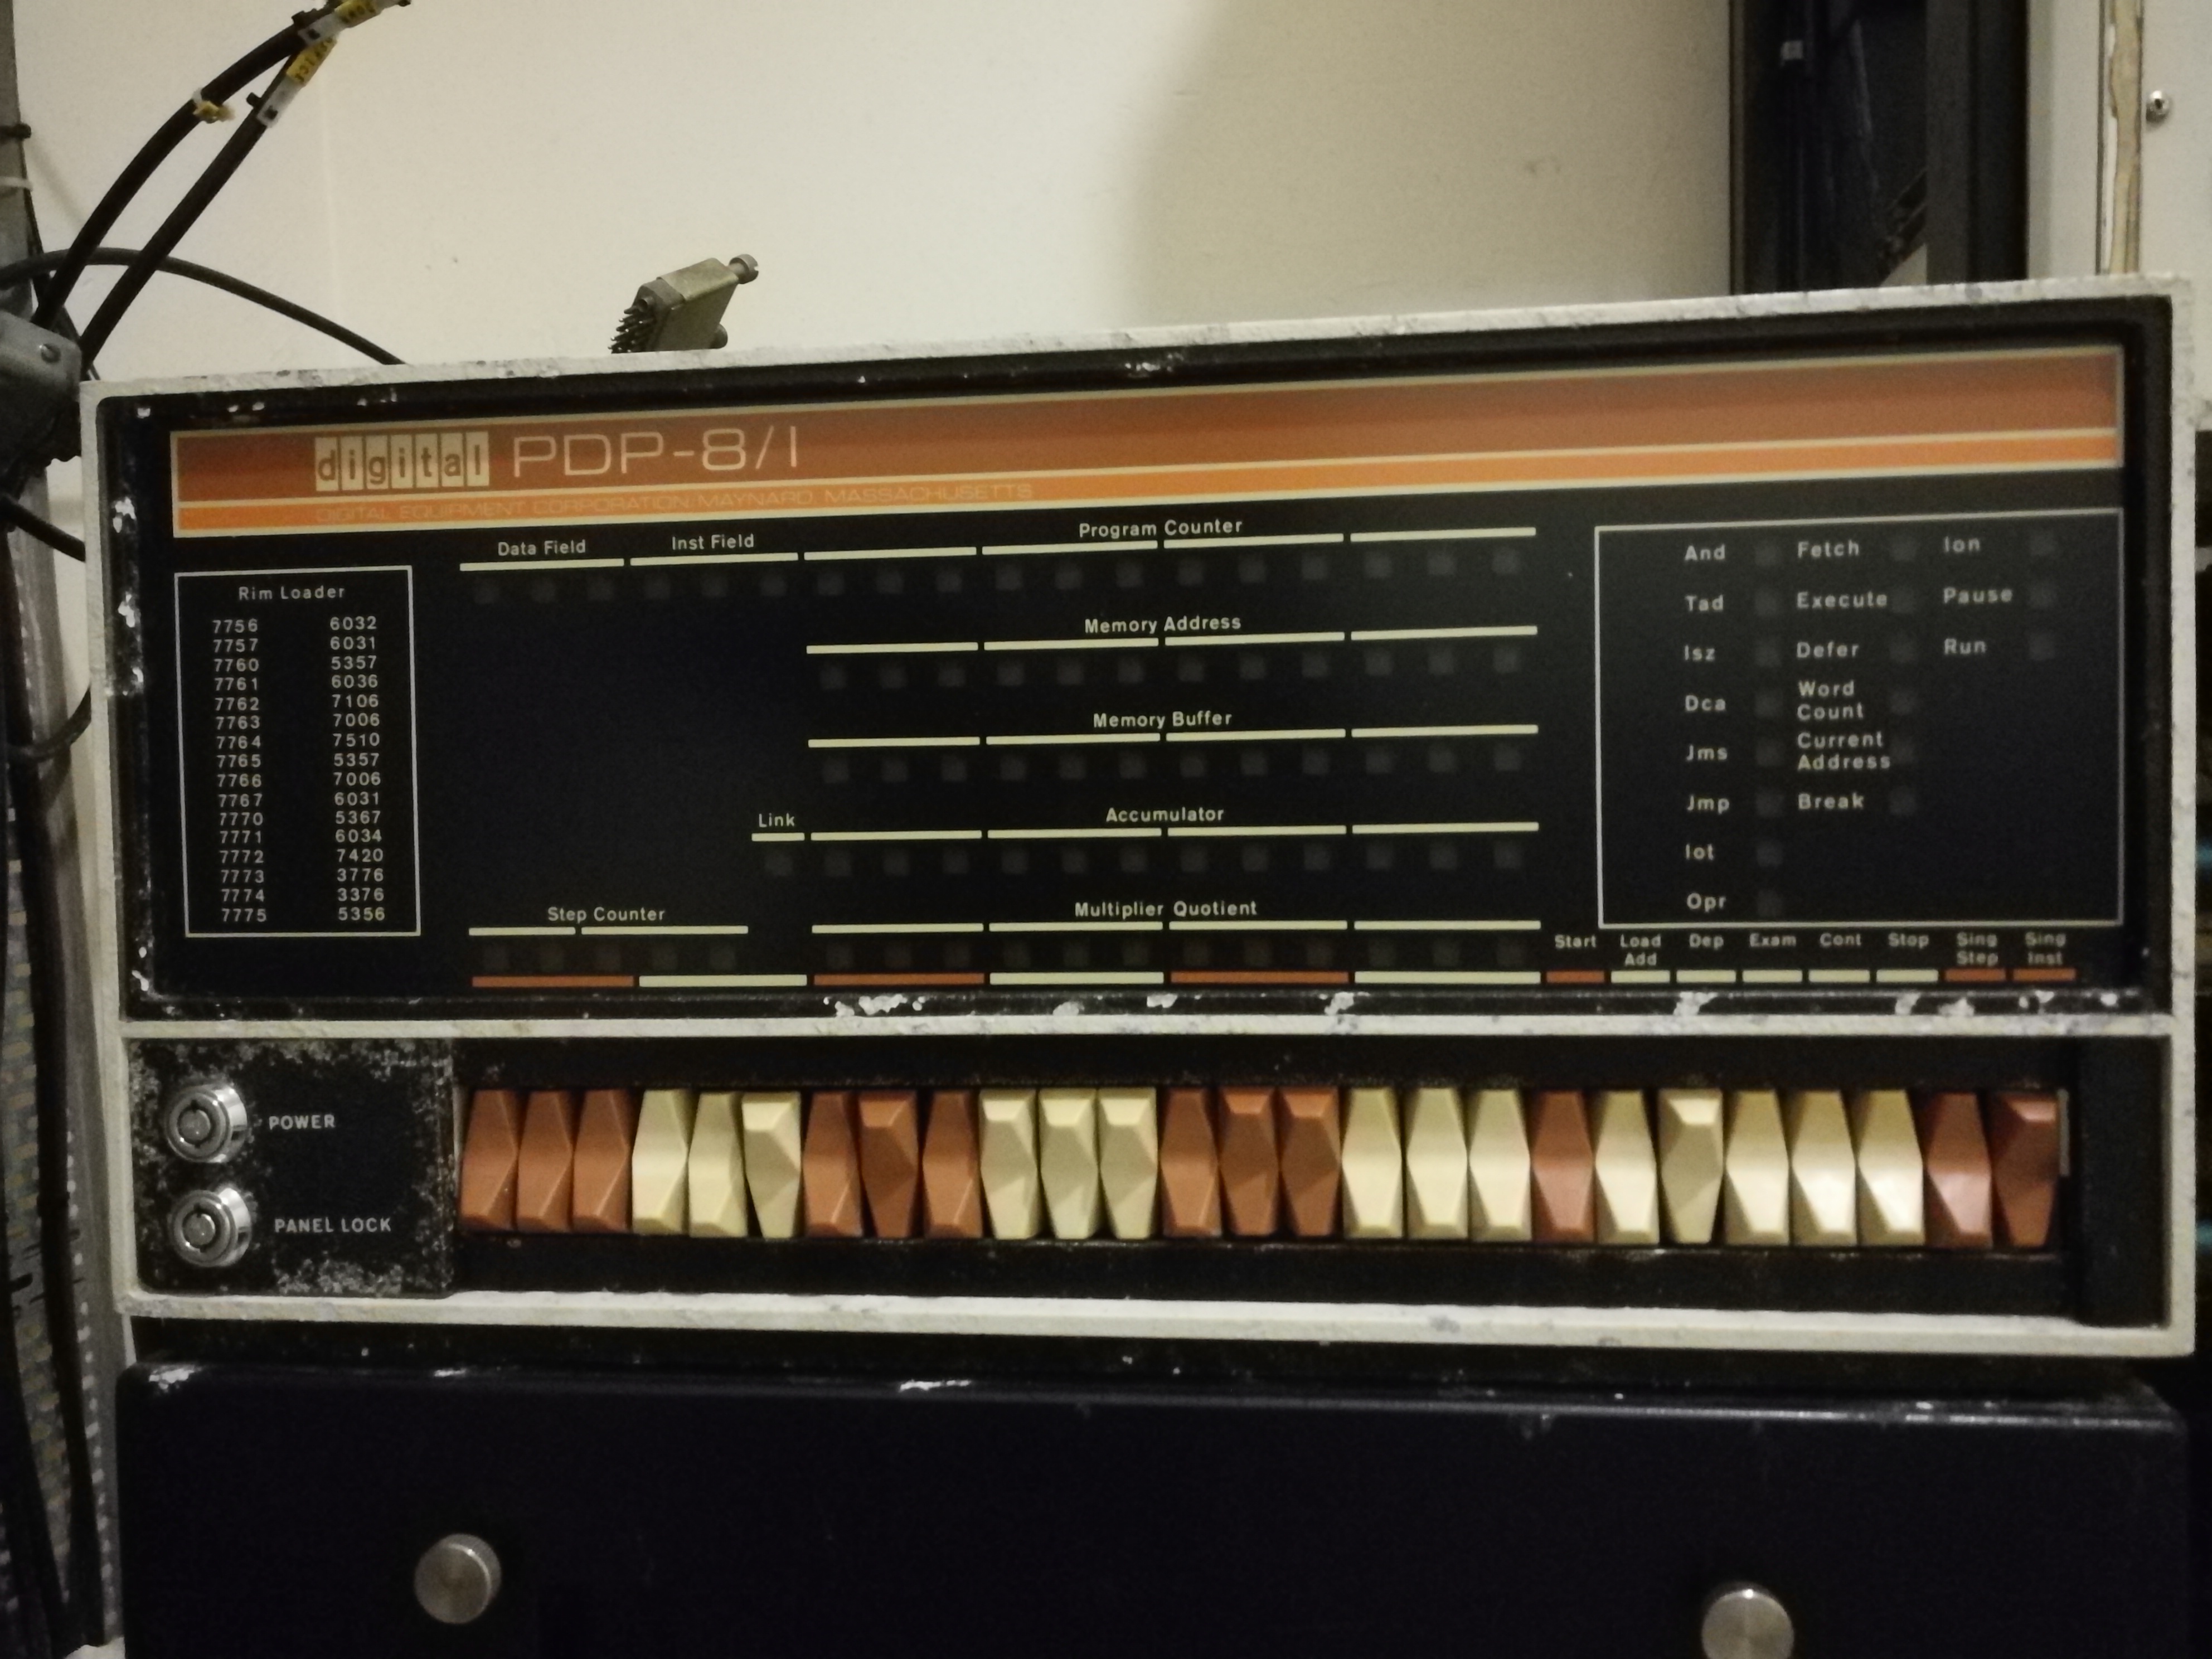 Close up of PDP8/l font panel - shows some corrosion